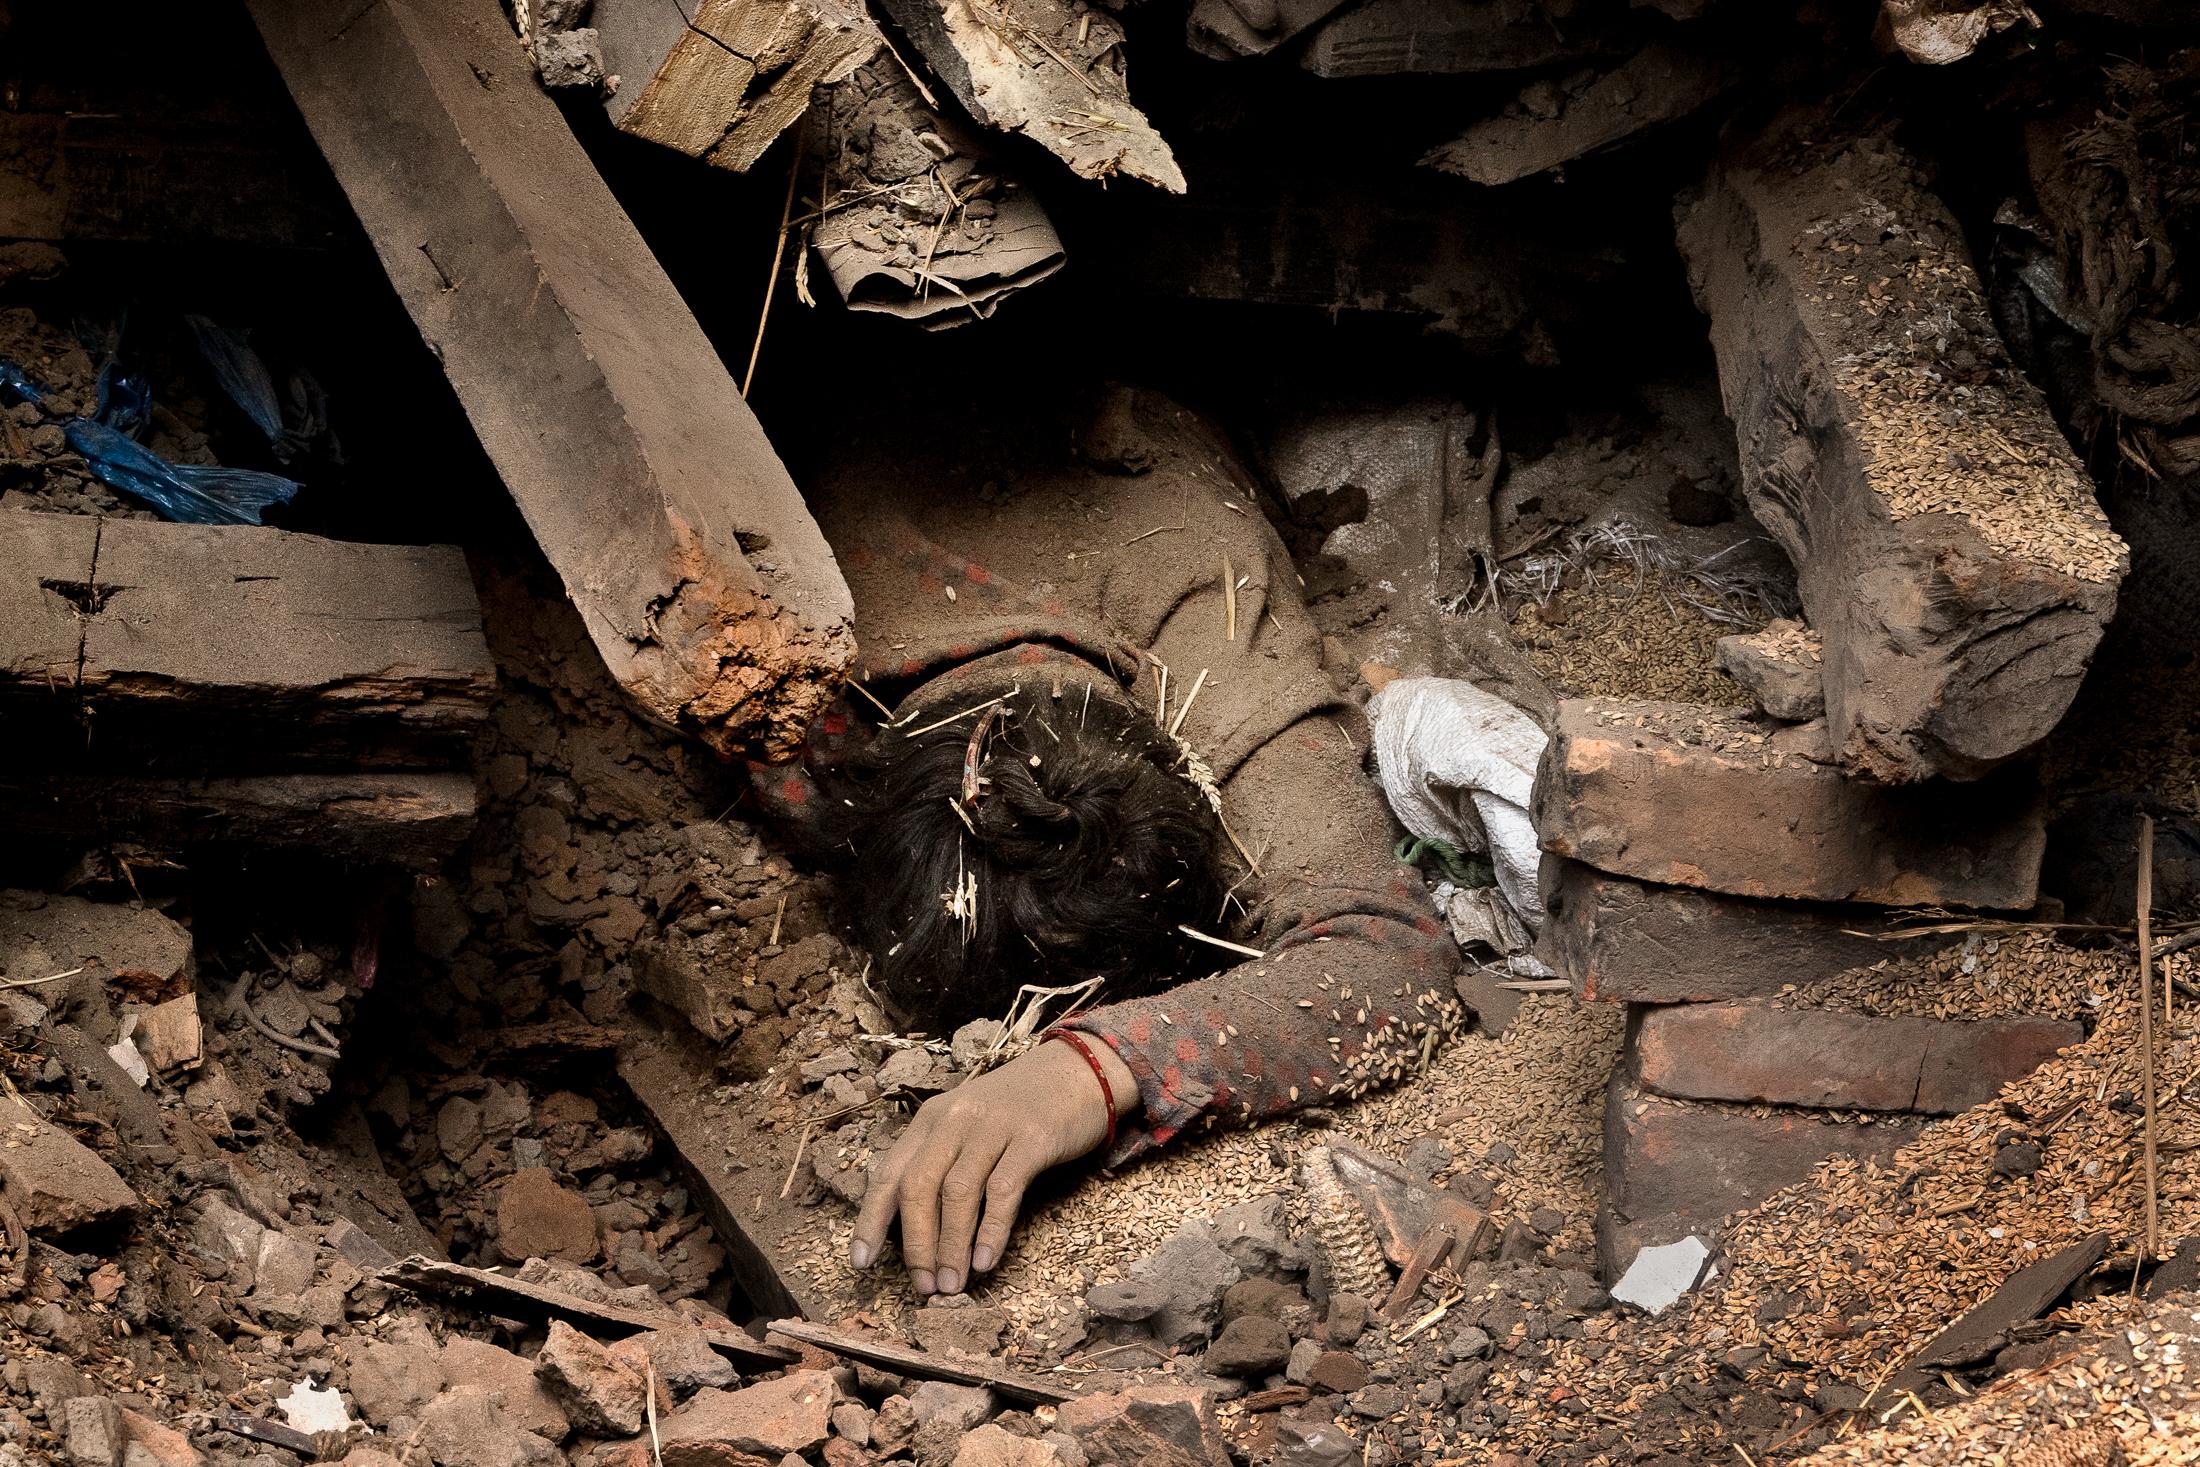 When the Earth Shook Nepal - BHAKTAPUR, NEPAL - APRIL 26: The body of one of the...